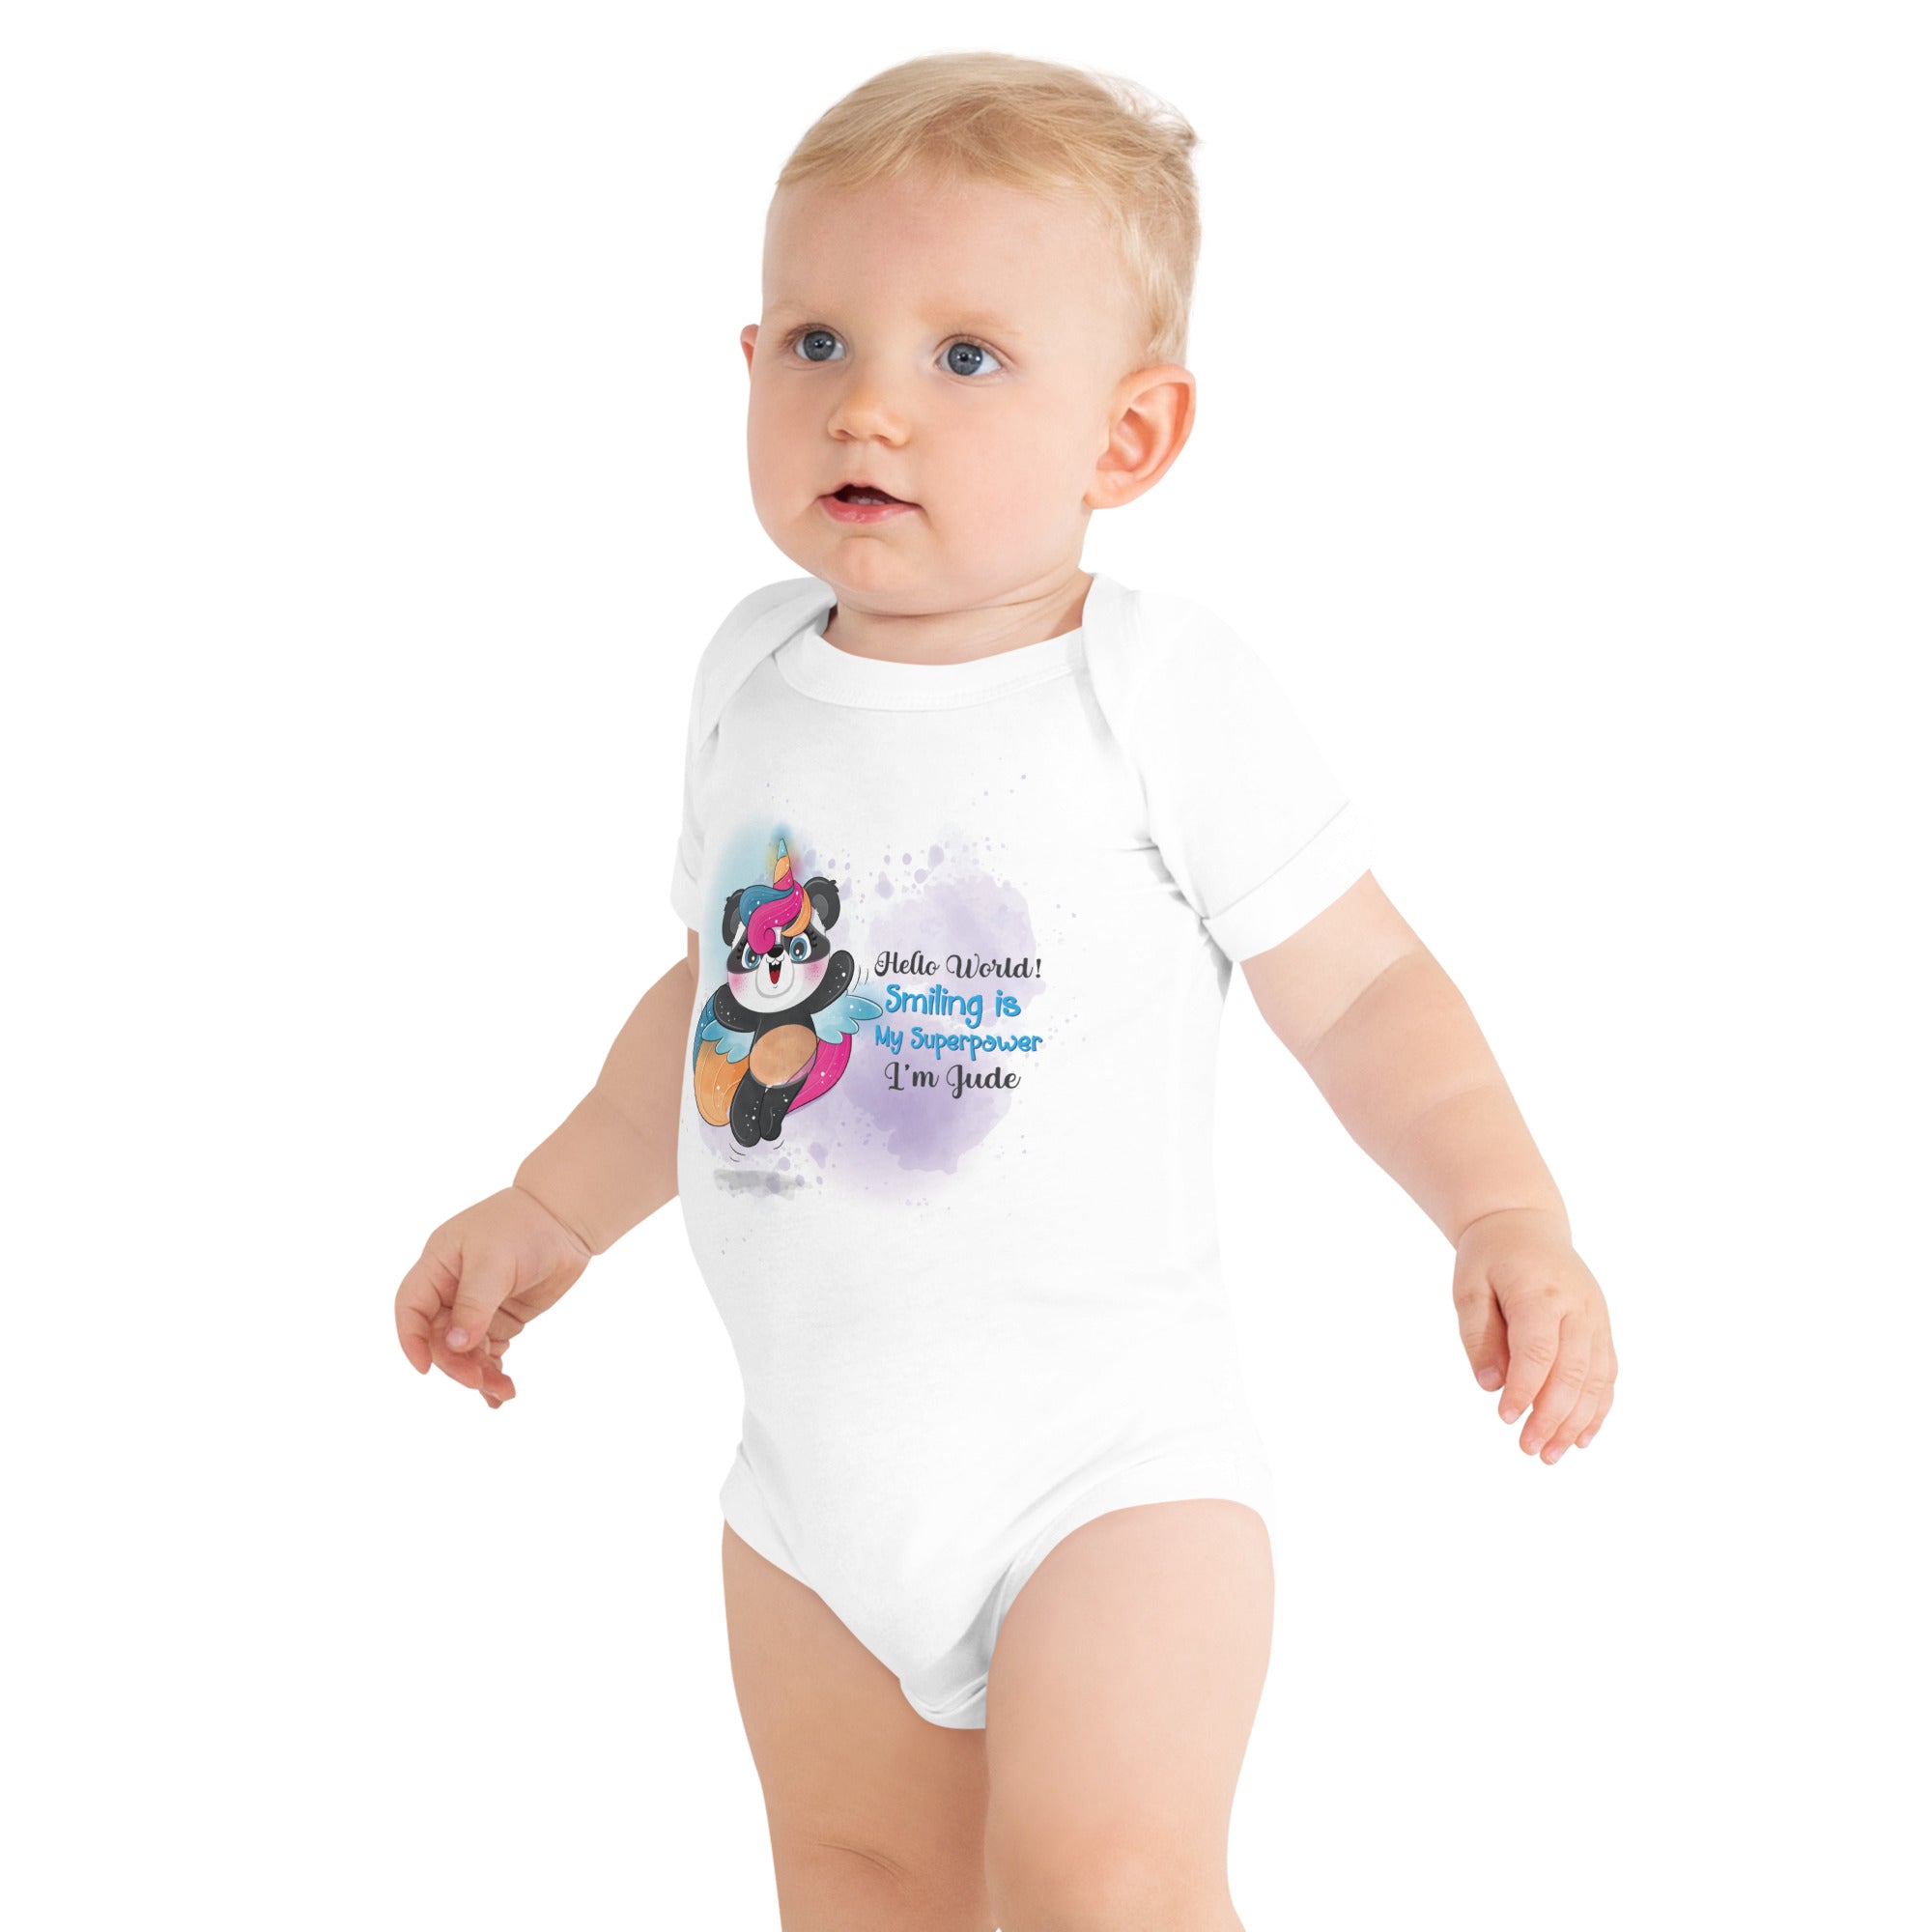 Baby Clothes, Infant Clothing, Short Sleeve Onesies